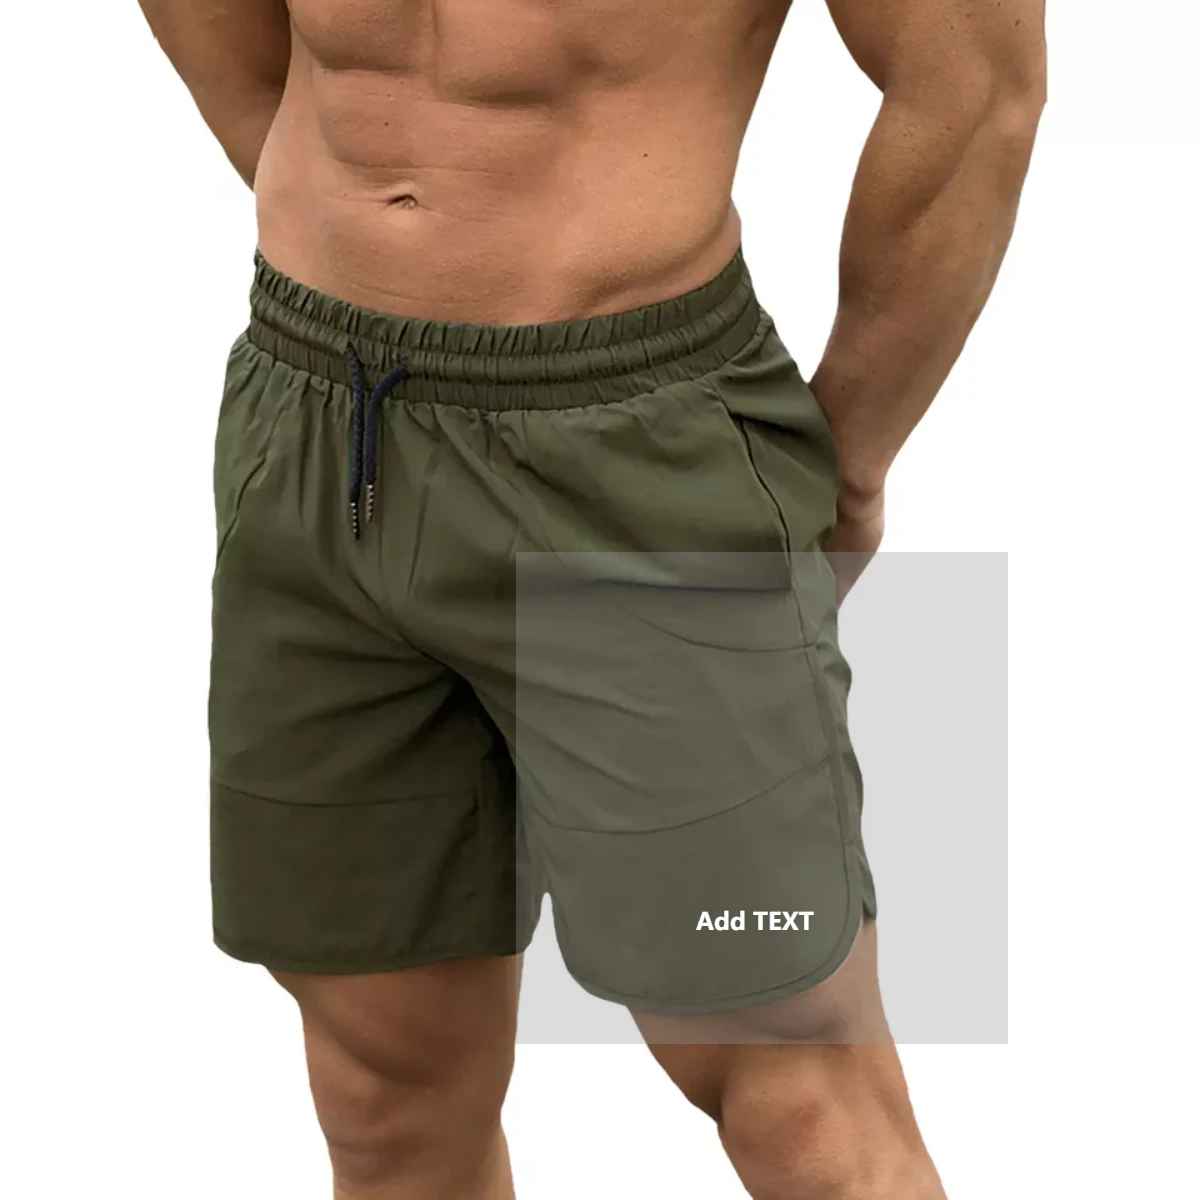 Wholesales 7 Inch Spandex Workout Shorts Mesh Fitness Mens Gym pants With Pocket men shorts